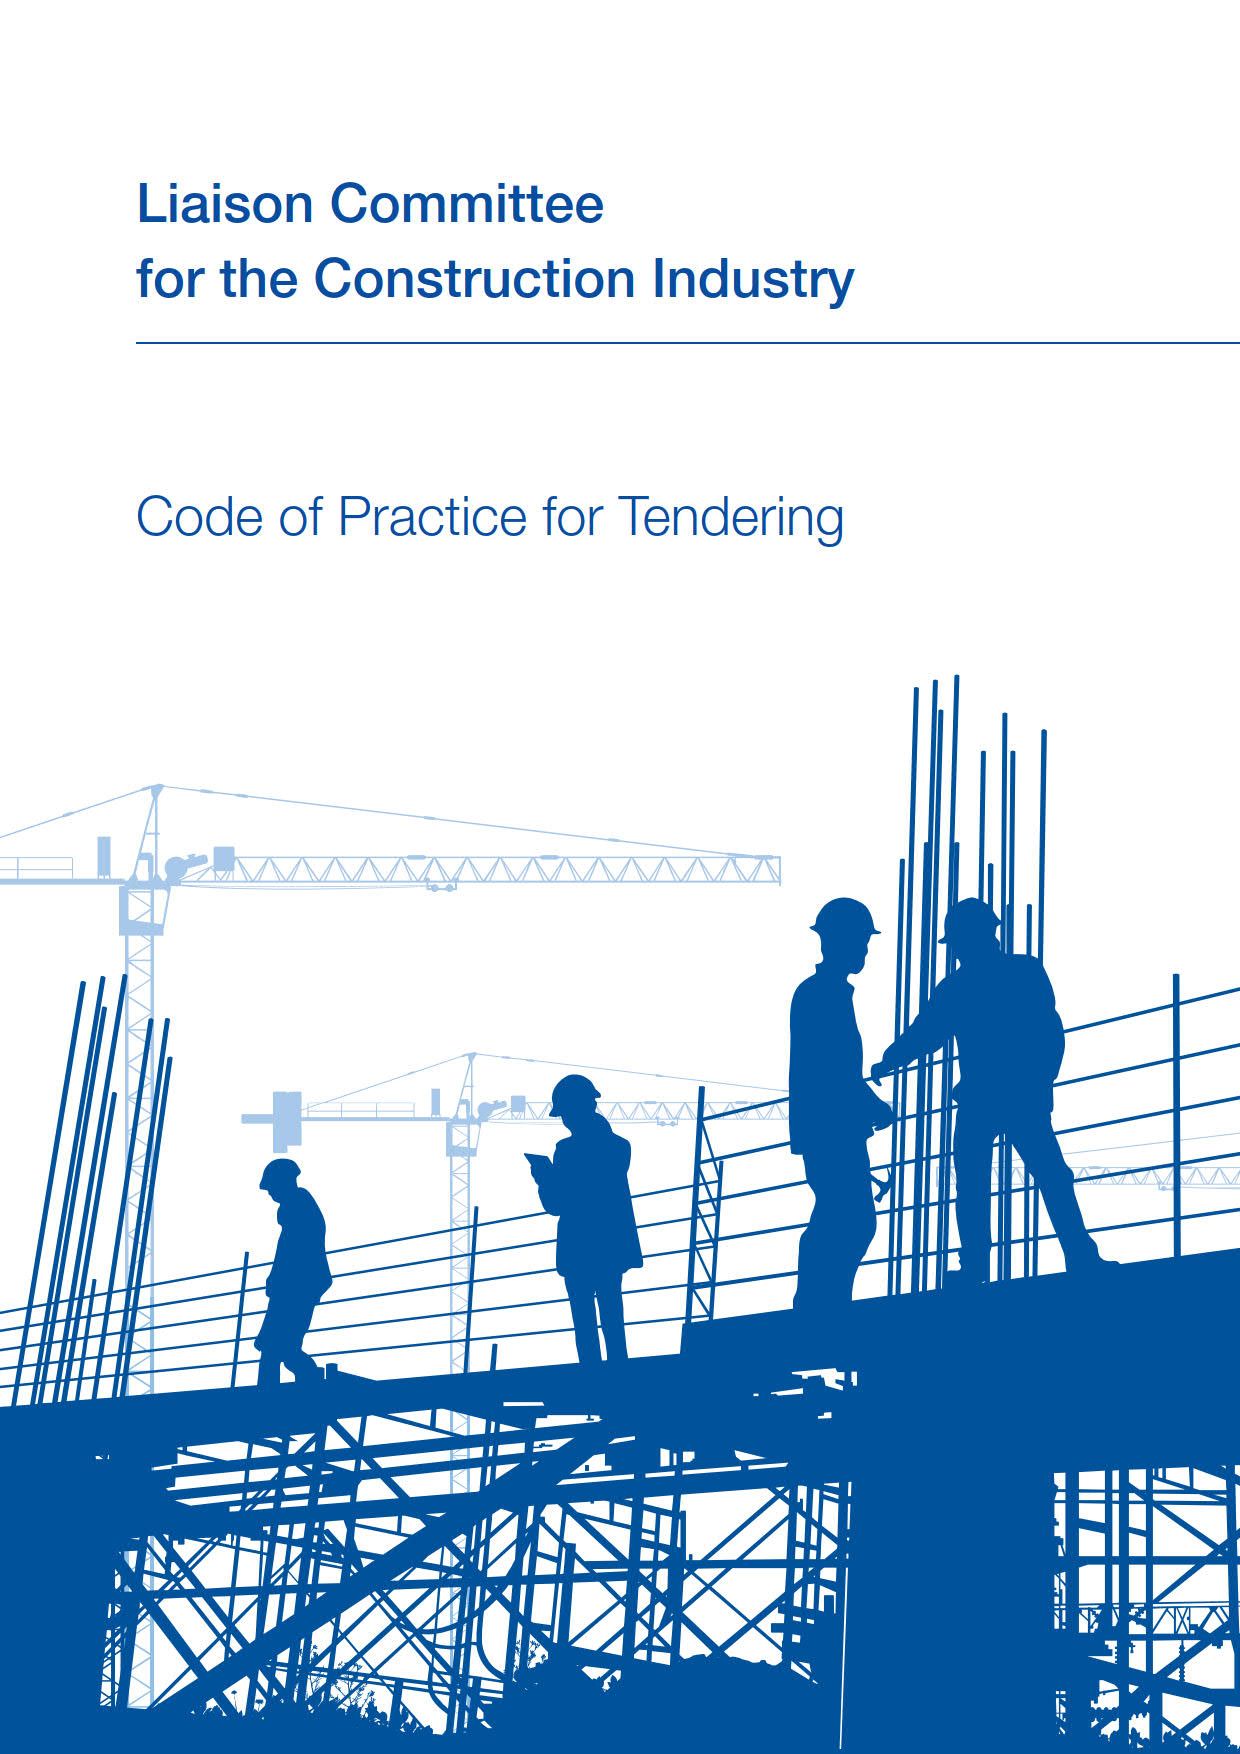 Updated “Code of Practice for Tendering” published